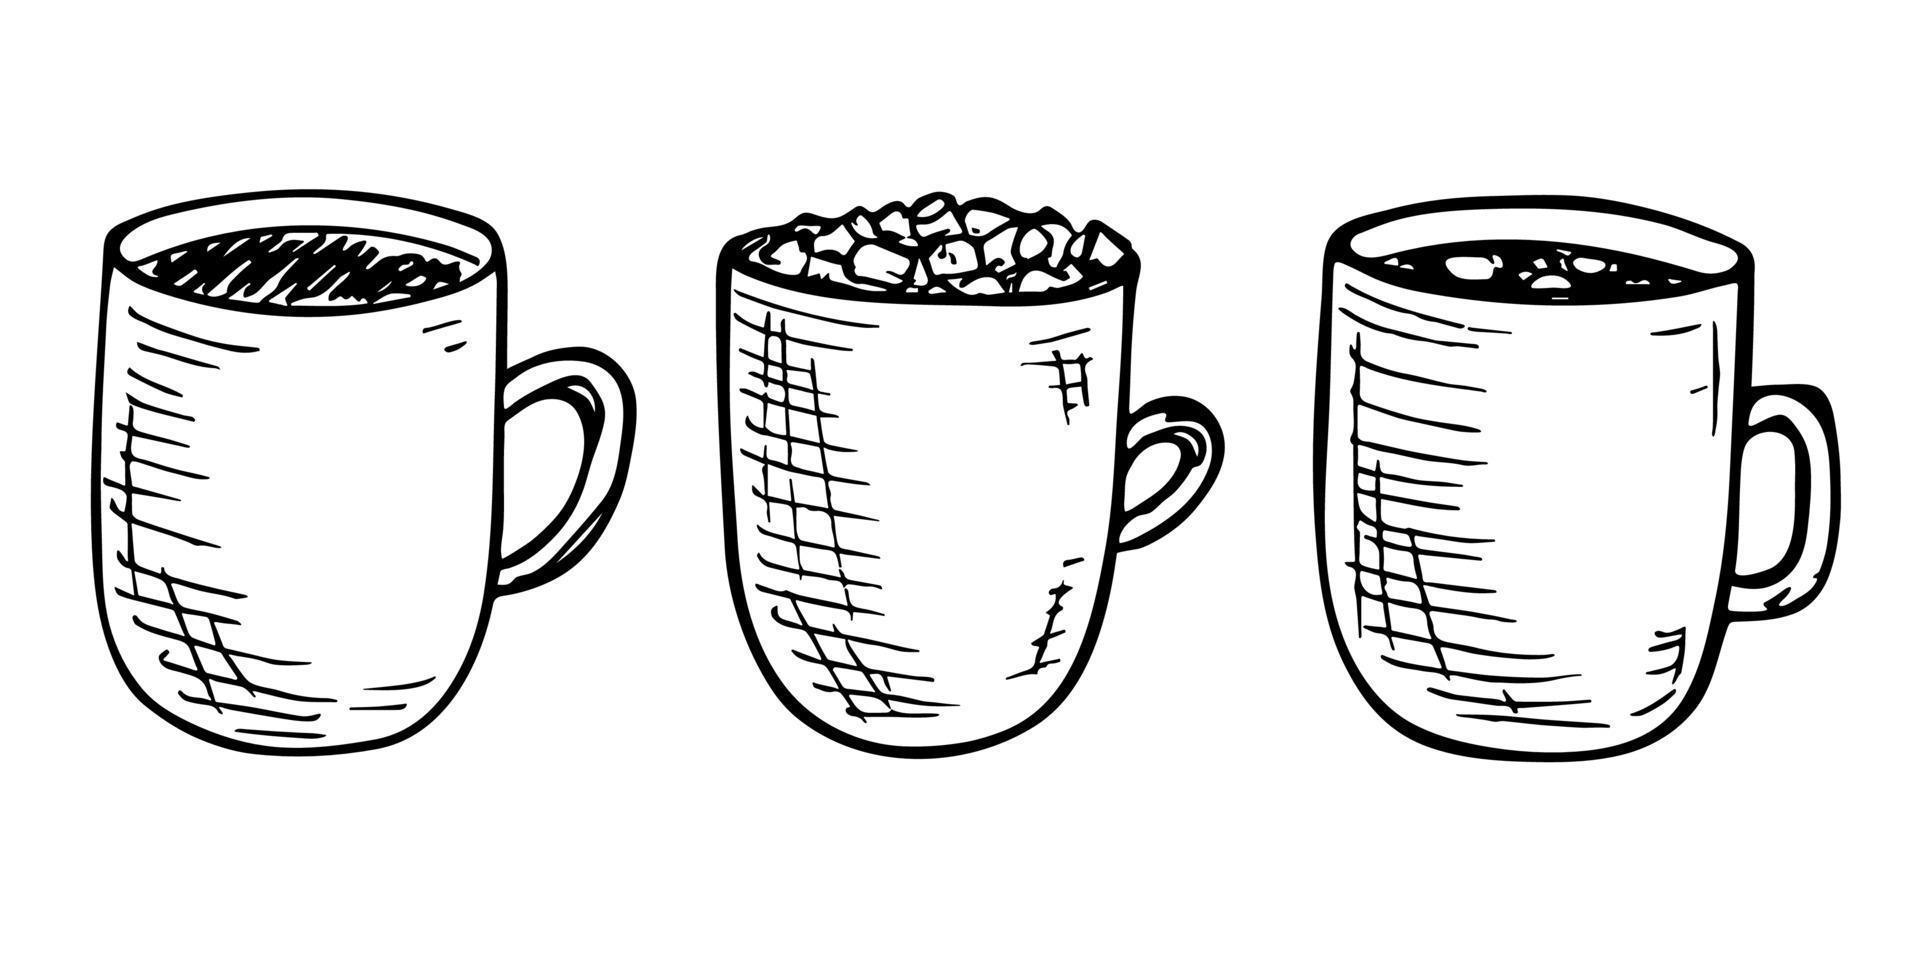 Cute cup of tea and coffee illustration. Simple mug clipart. Cozy home doodle set vector